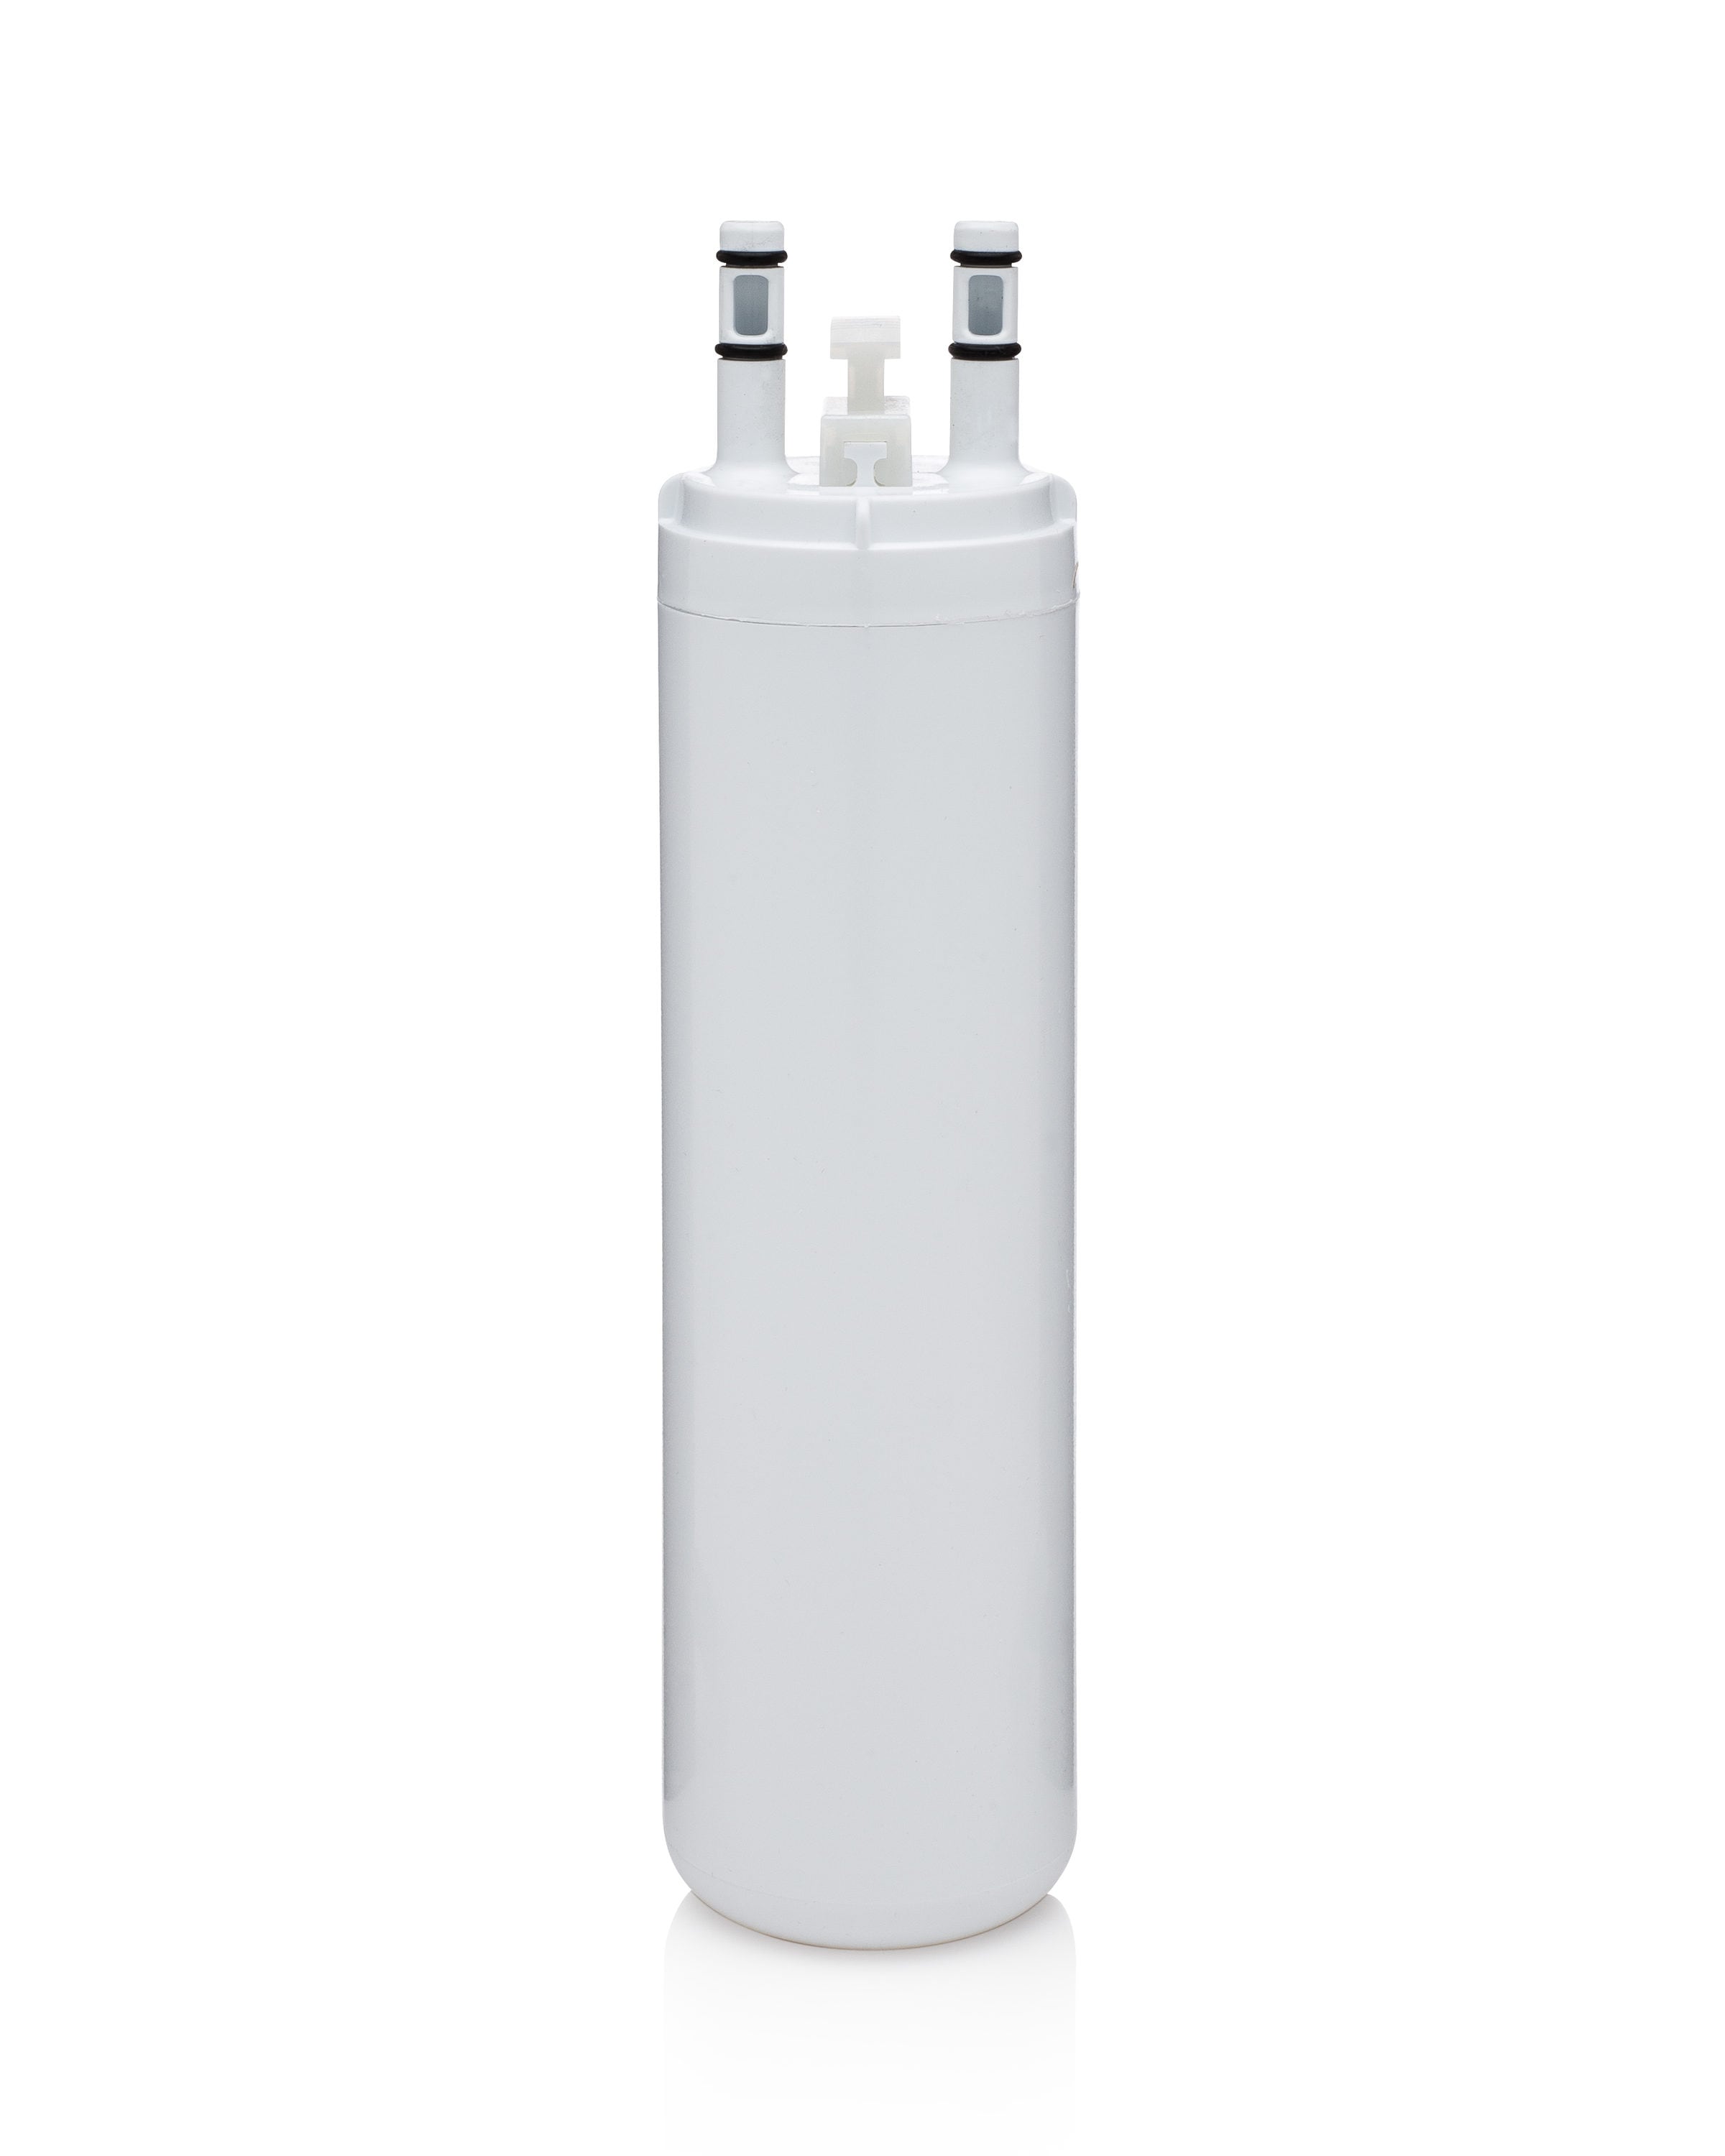 Frigidaire WF3CB PureSource 3 Replacement Refrigerator Water Filter –  PureCoolFilters